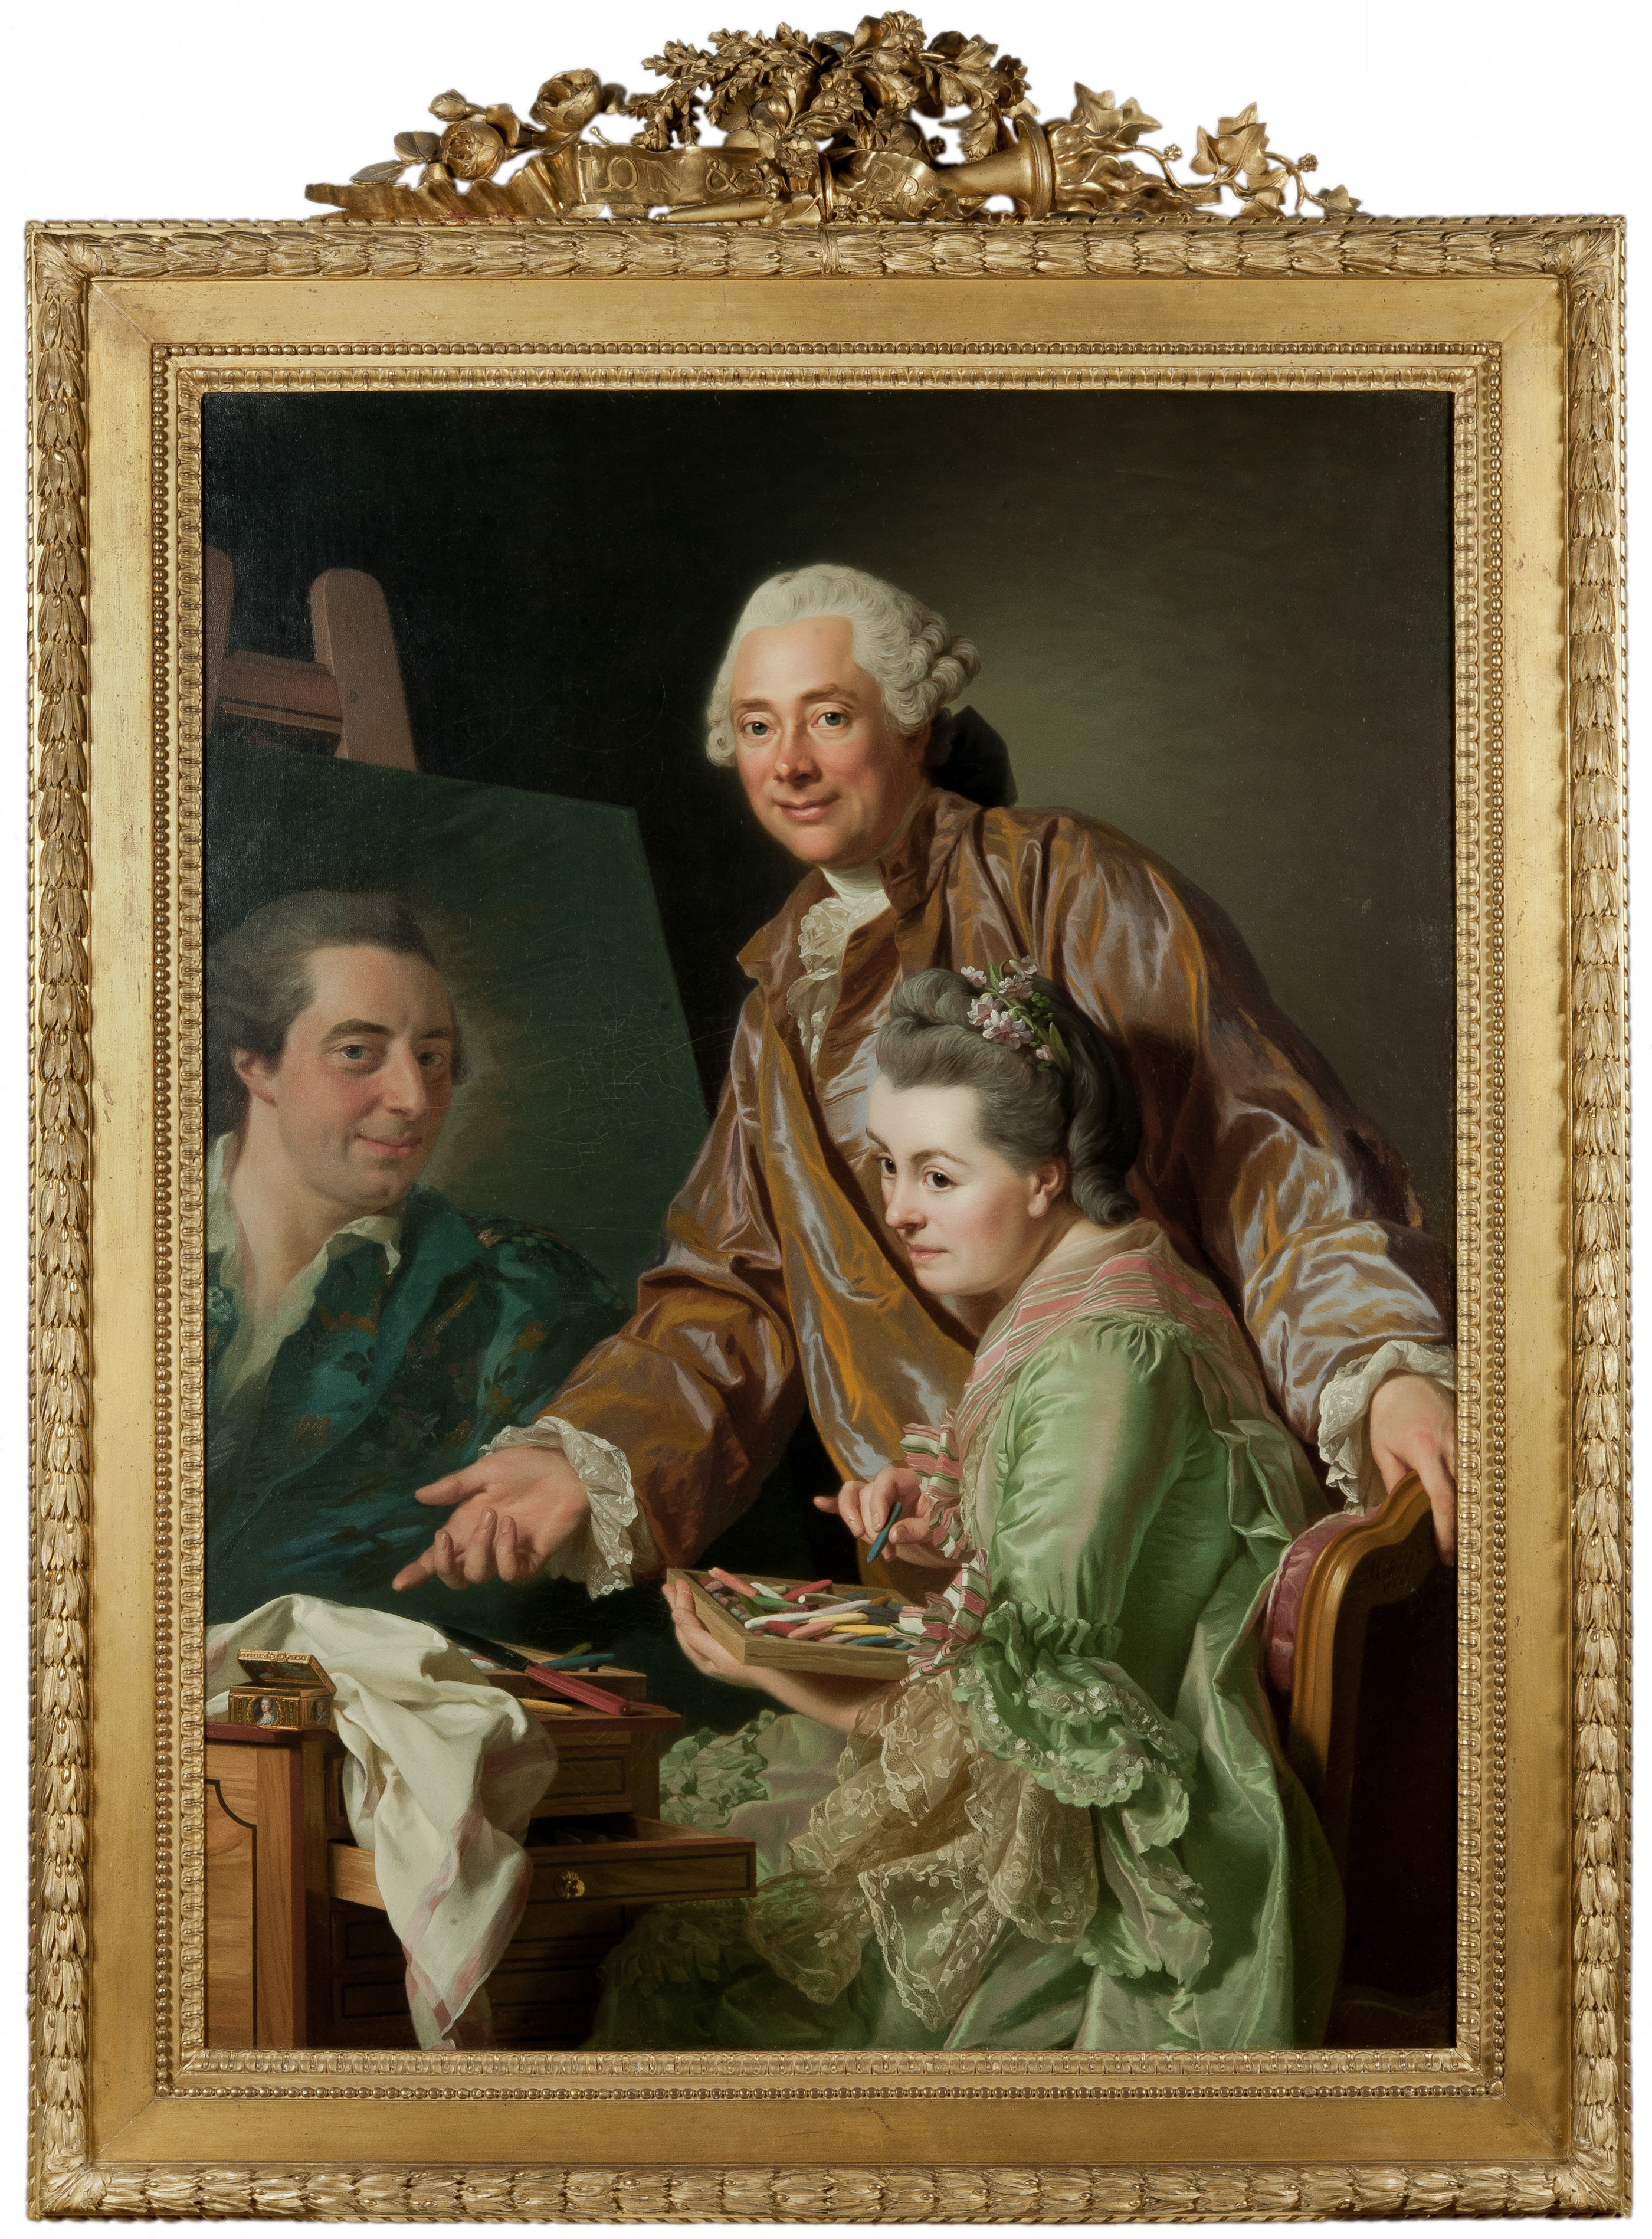 The Artist and his Wife Marie Suzanne Giroust painting the Portrait of Henrik Wilhelm Peill by Alexander Roslin - 1767 - 131 x 98,5 cm Nationalmuseum